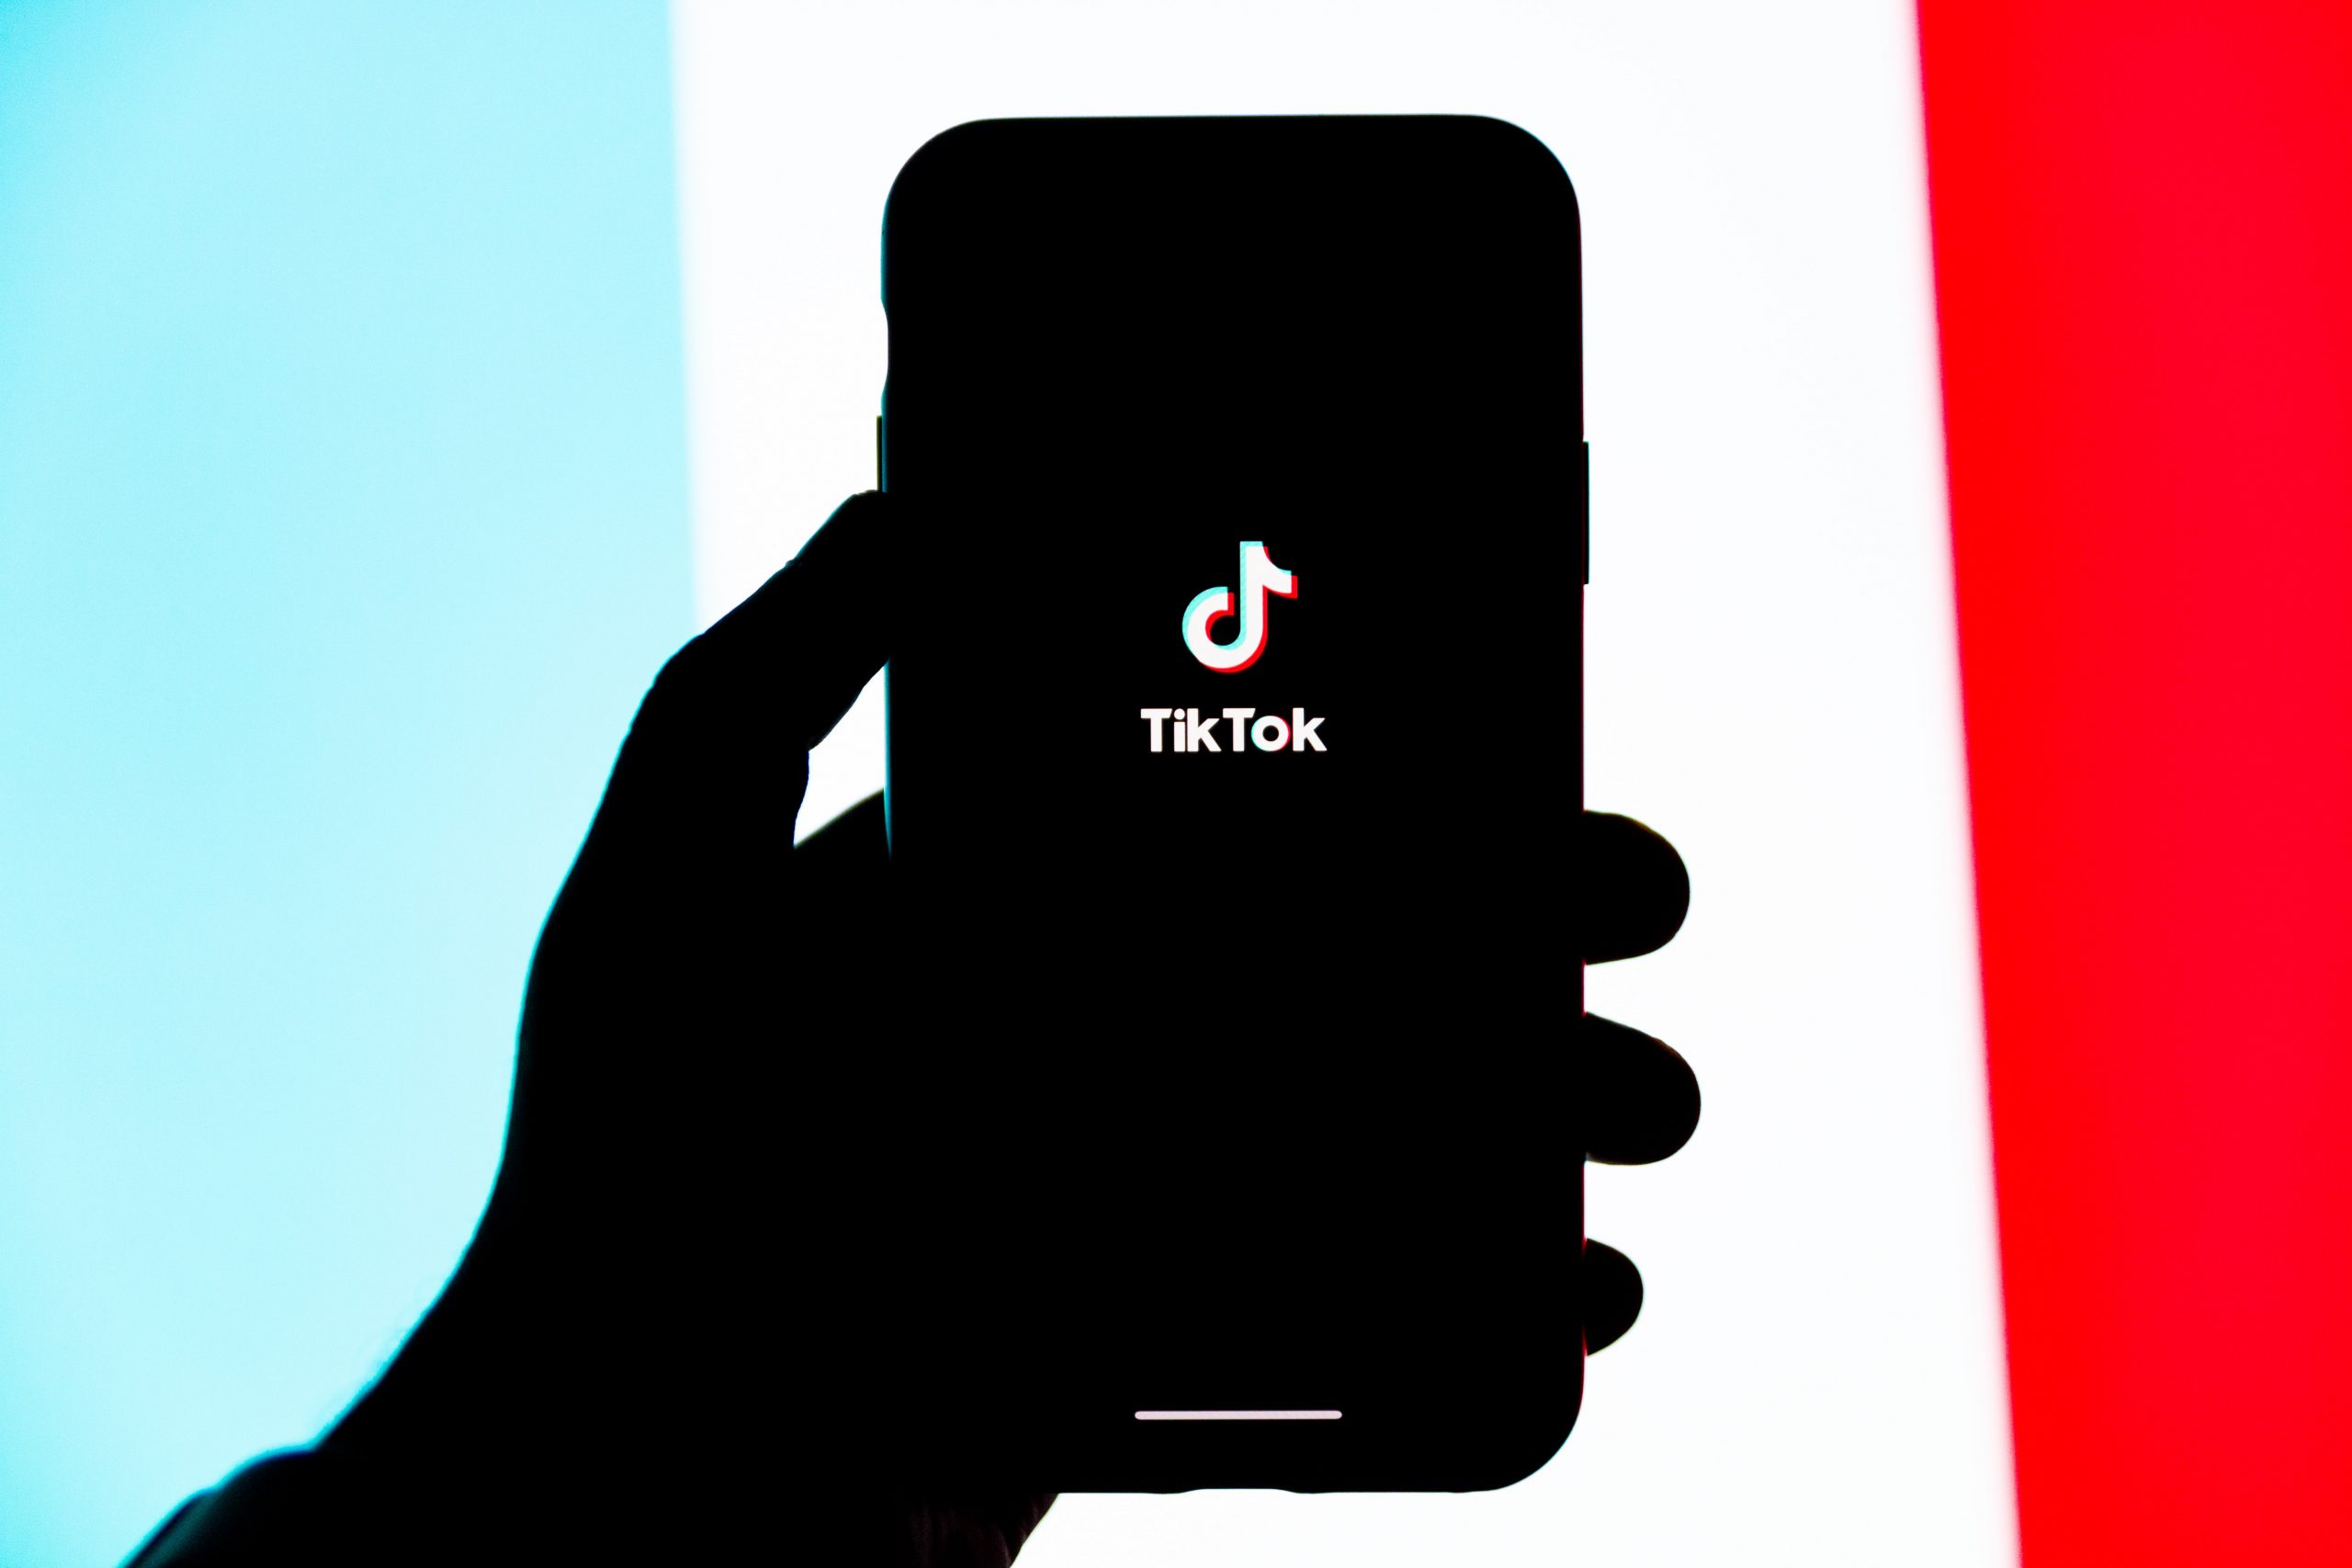 tiktok_data_breach_what_we_can_learn_about_protecting_brand_image